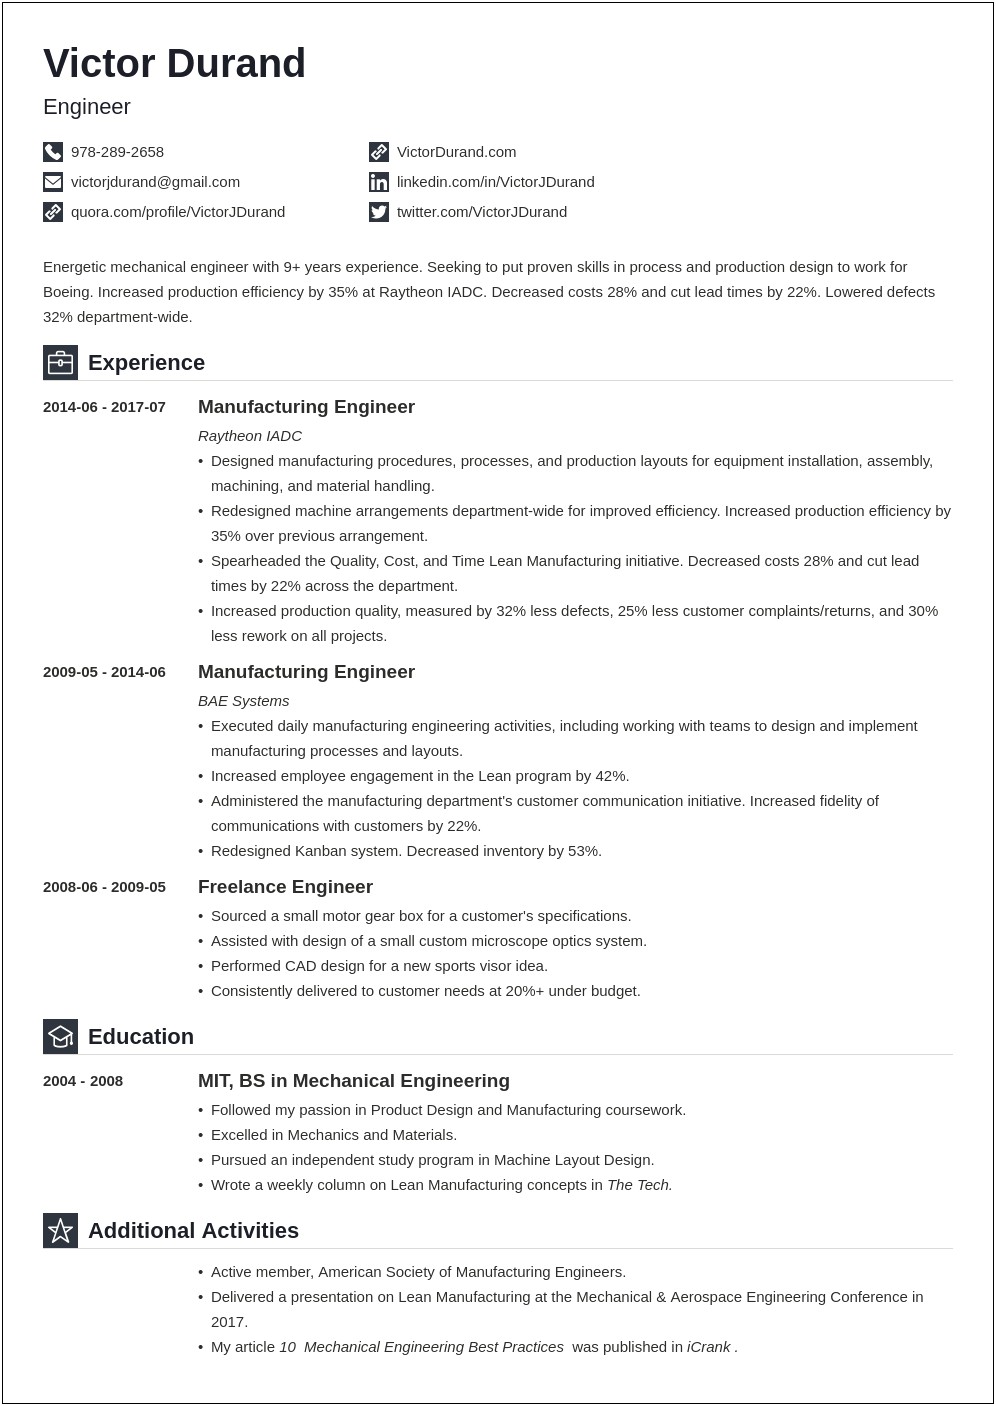 Sample Resume For College Student Engineering